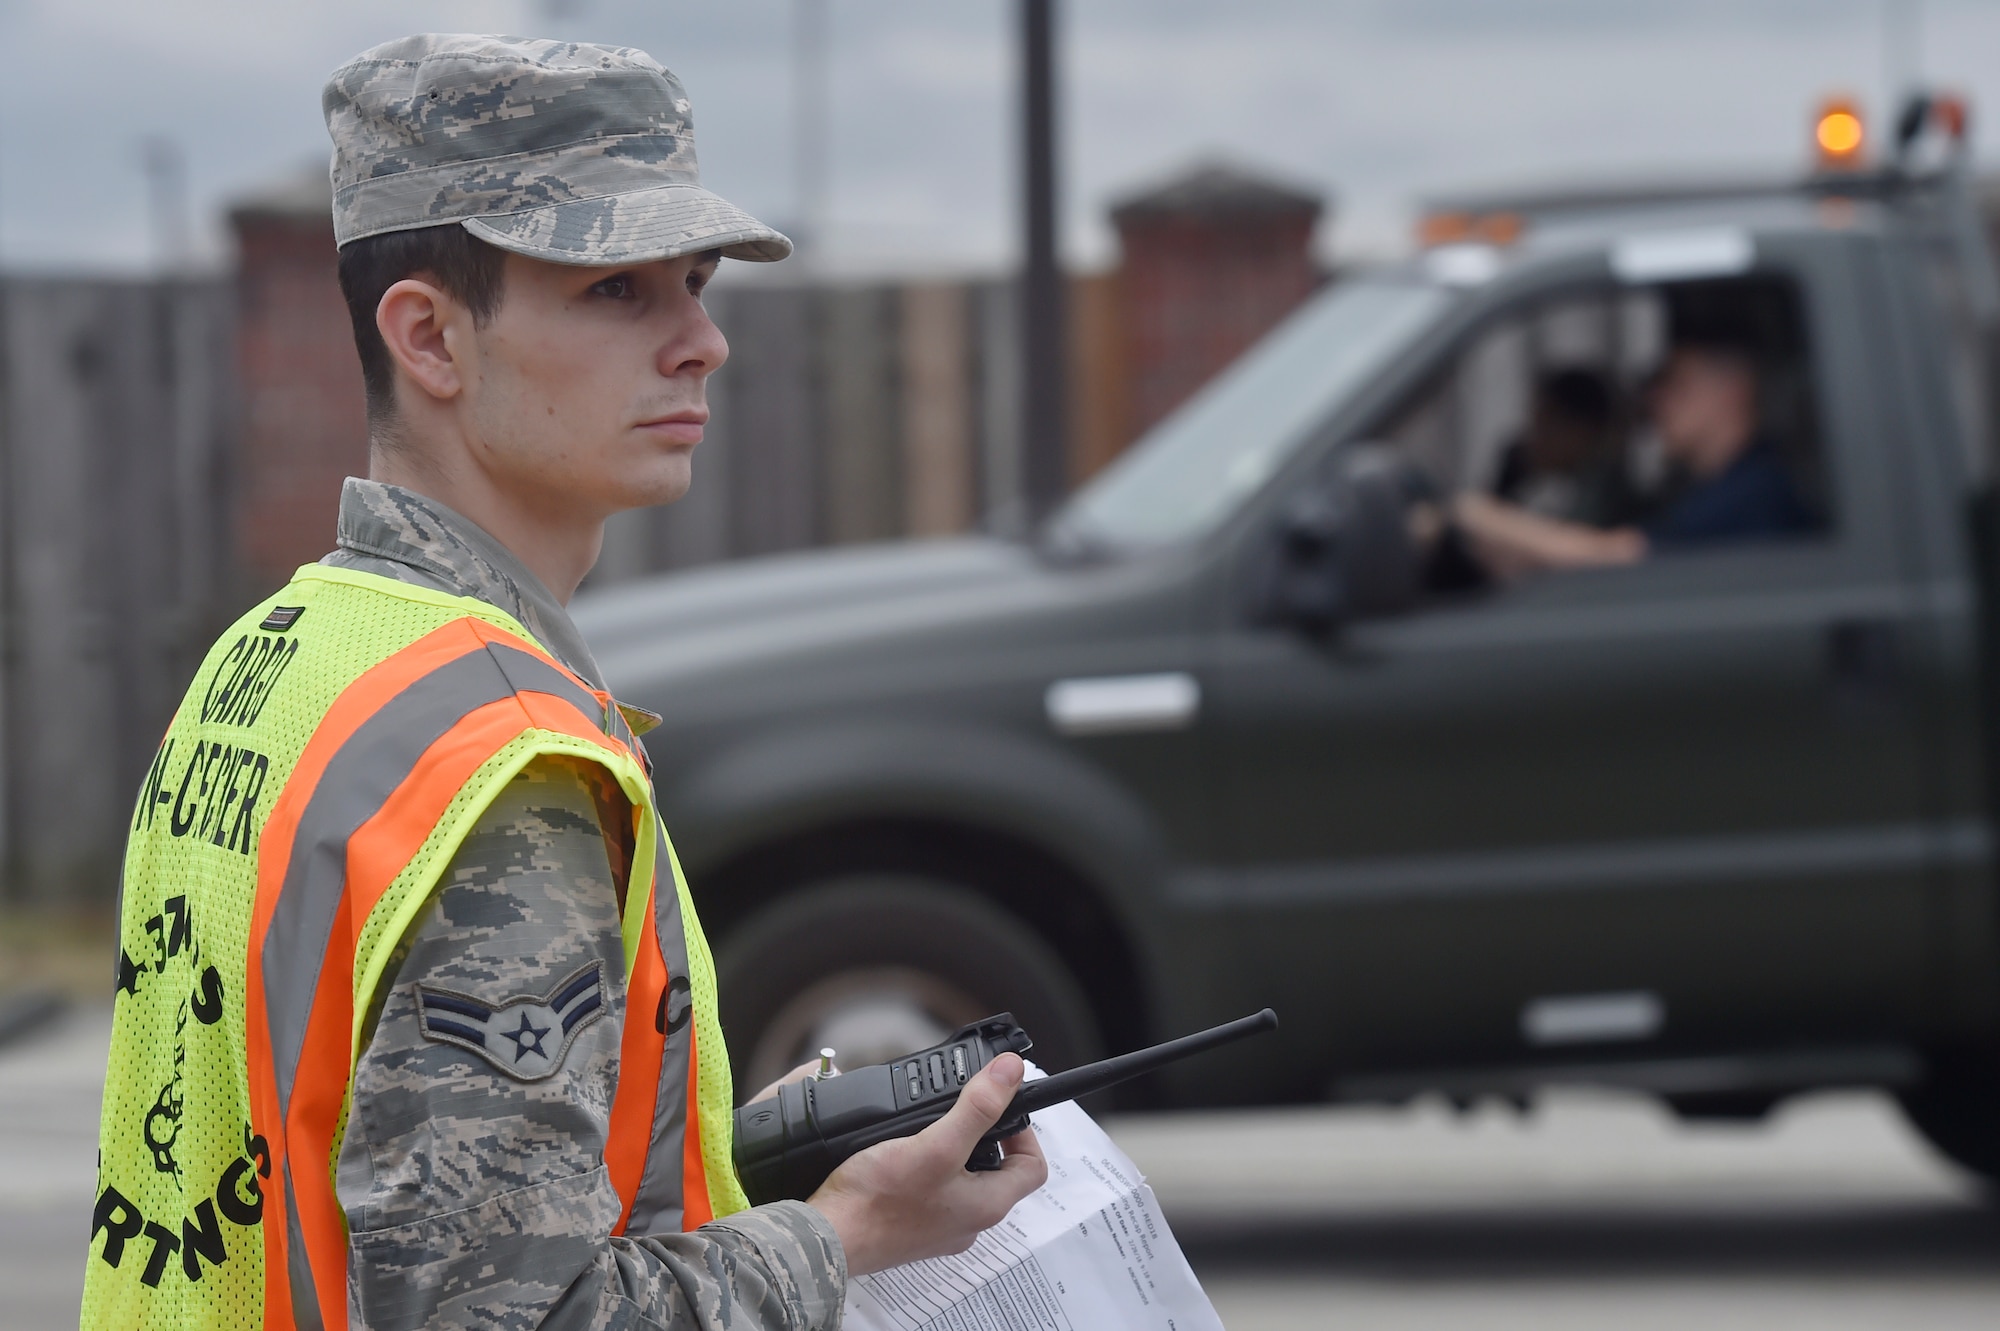 Airman 1st Class Tyler Connolly, 437th Aerial Port Squadron traffic management operations technician, checks equipment during a simulated cargo inspection at a cargo deployment function as part of mobility exercise Bold Eagle Feb. 26, at Joint Base Charleston, S.C.